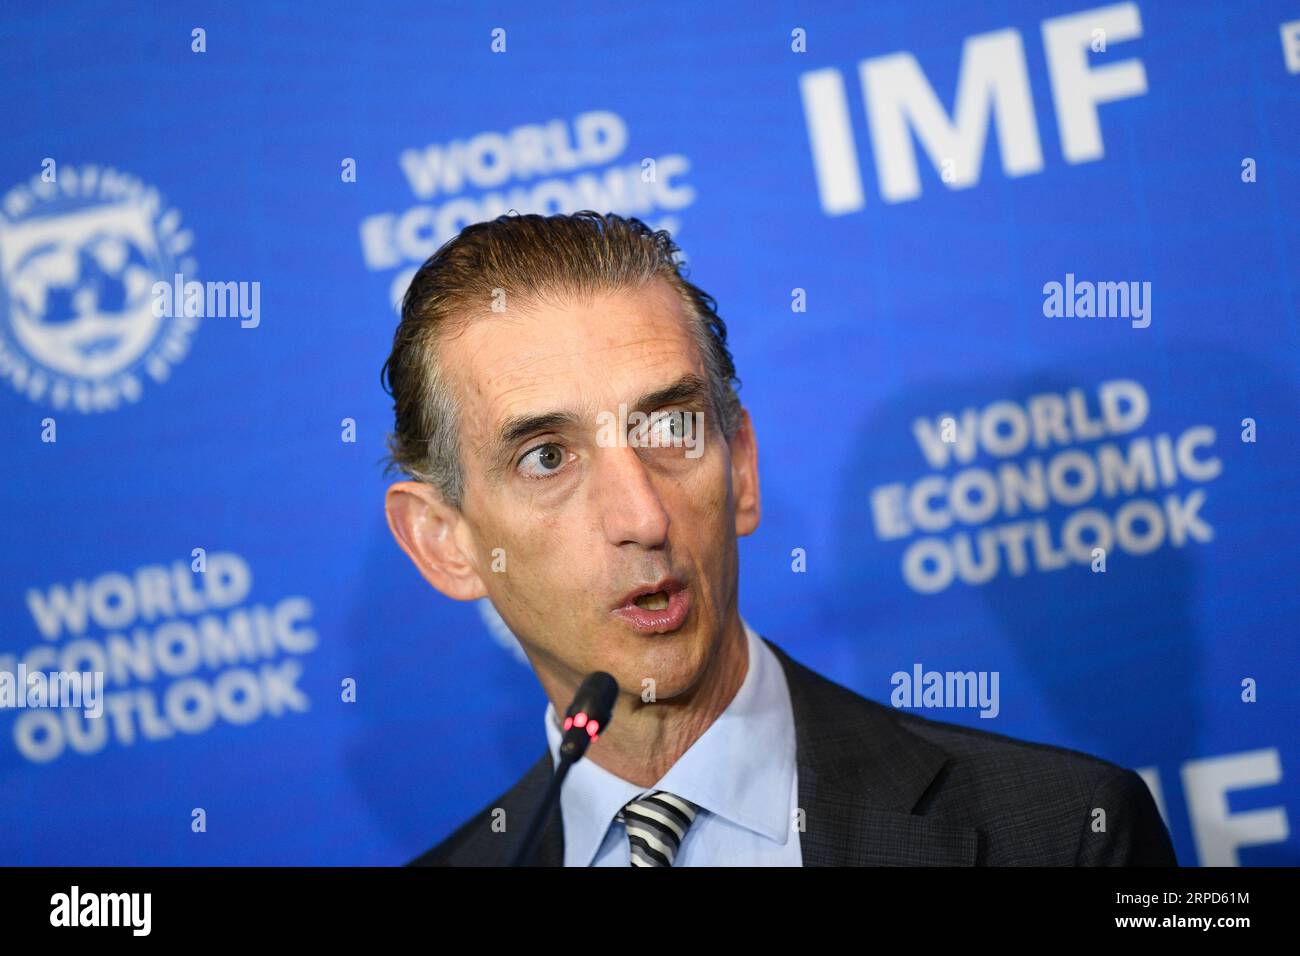 (190724) -- SANTIAGO, July 24, 2019 (Xinhua) -- Gian Maria Milesi-Ferretti, the IMF s deputy director for research, speaks during a press conference in Santiago, Chile, July 23, 2019. The International Monetary Fund (IMF) lowered its global growth forecast to 3.2 percent in 2019, according to a report released here on Tuesday. (Xinhua/Jorge Villegas) CHILE-SANTIAGO-IMF-GLOBAL GROWTH FORECAST PUBLICATIONxNOTxINxCHN Stock Photo